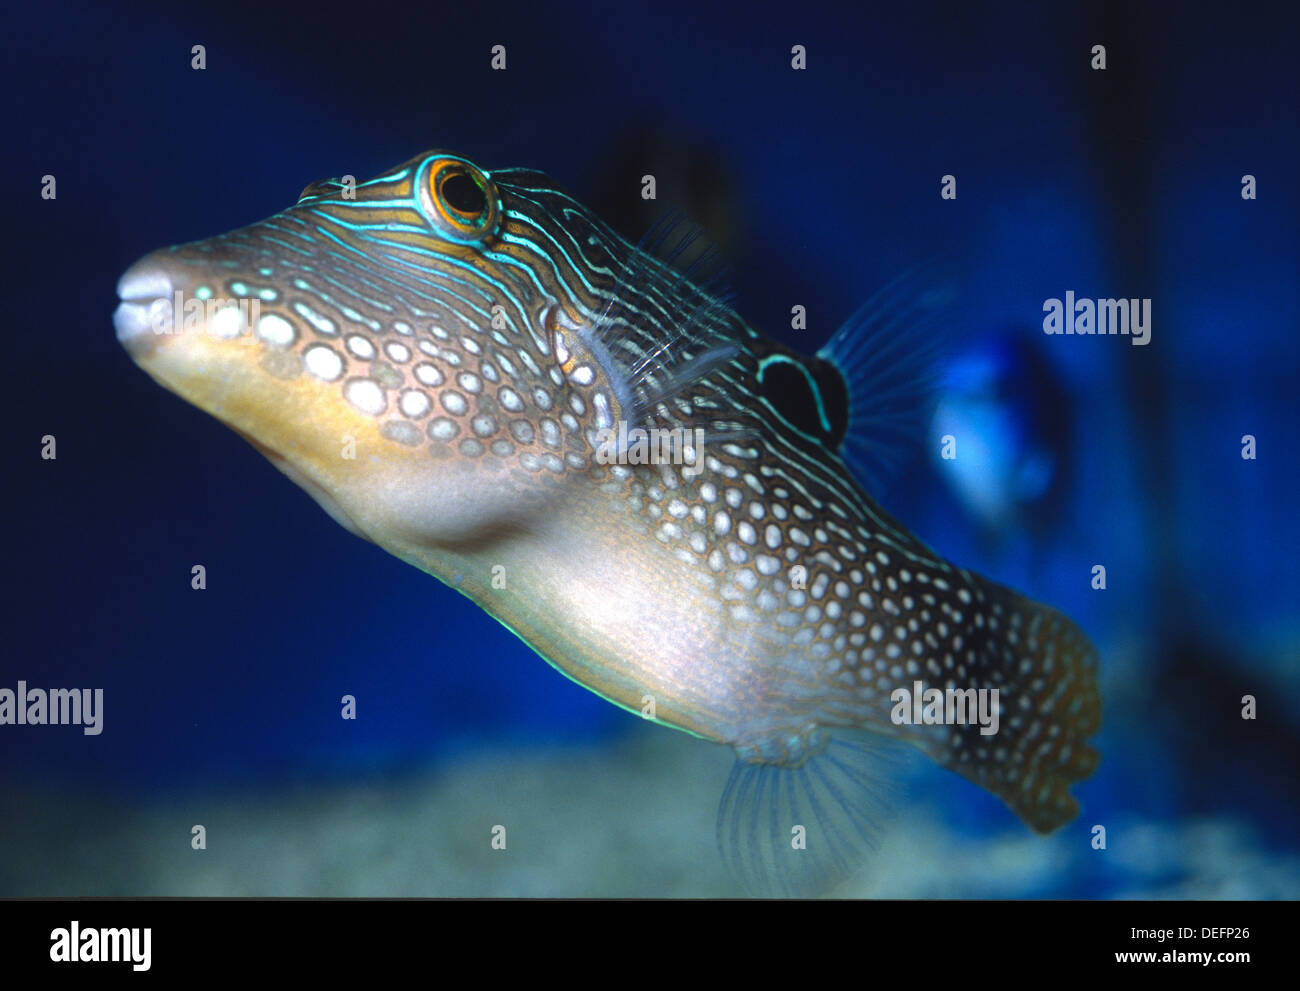 Spotted sharpnose, Canthigaster solandri, Tetraodontidae, Indo-pacific Ocean Stock Photo